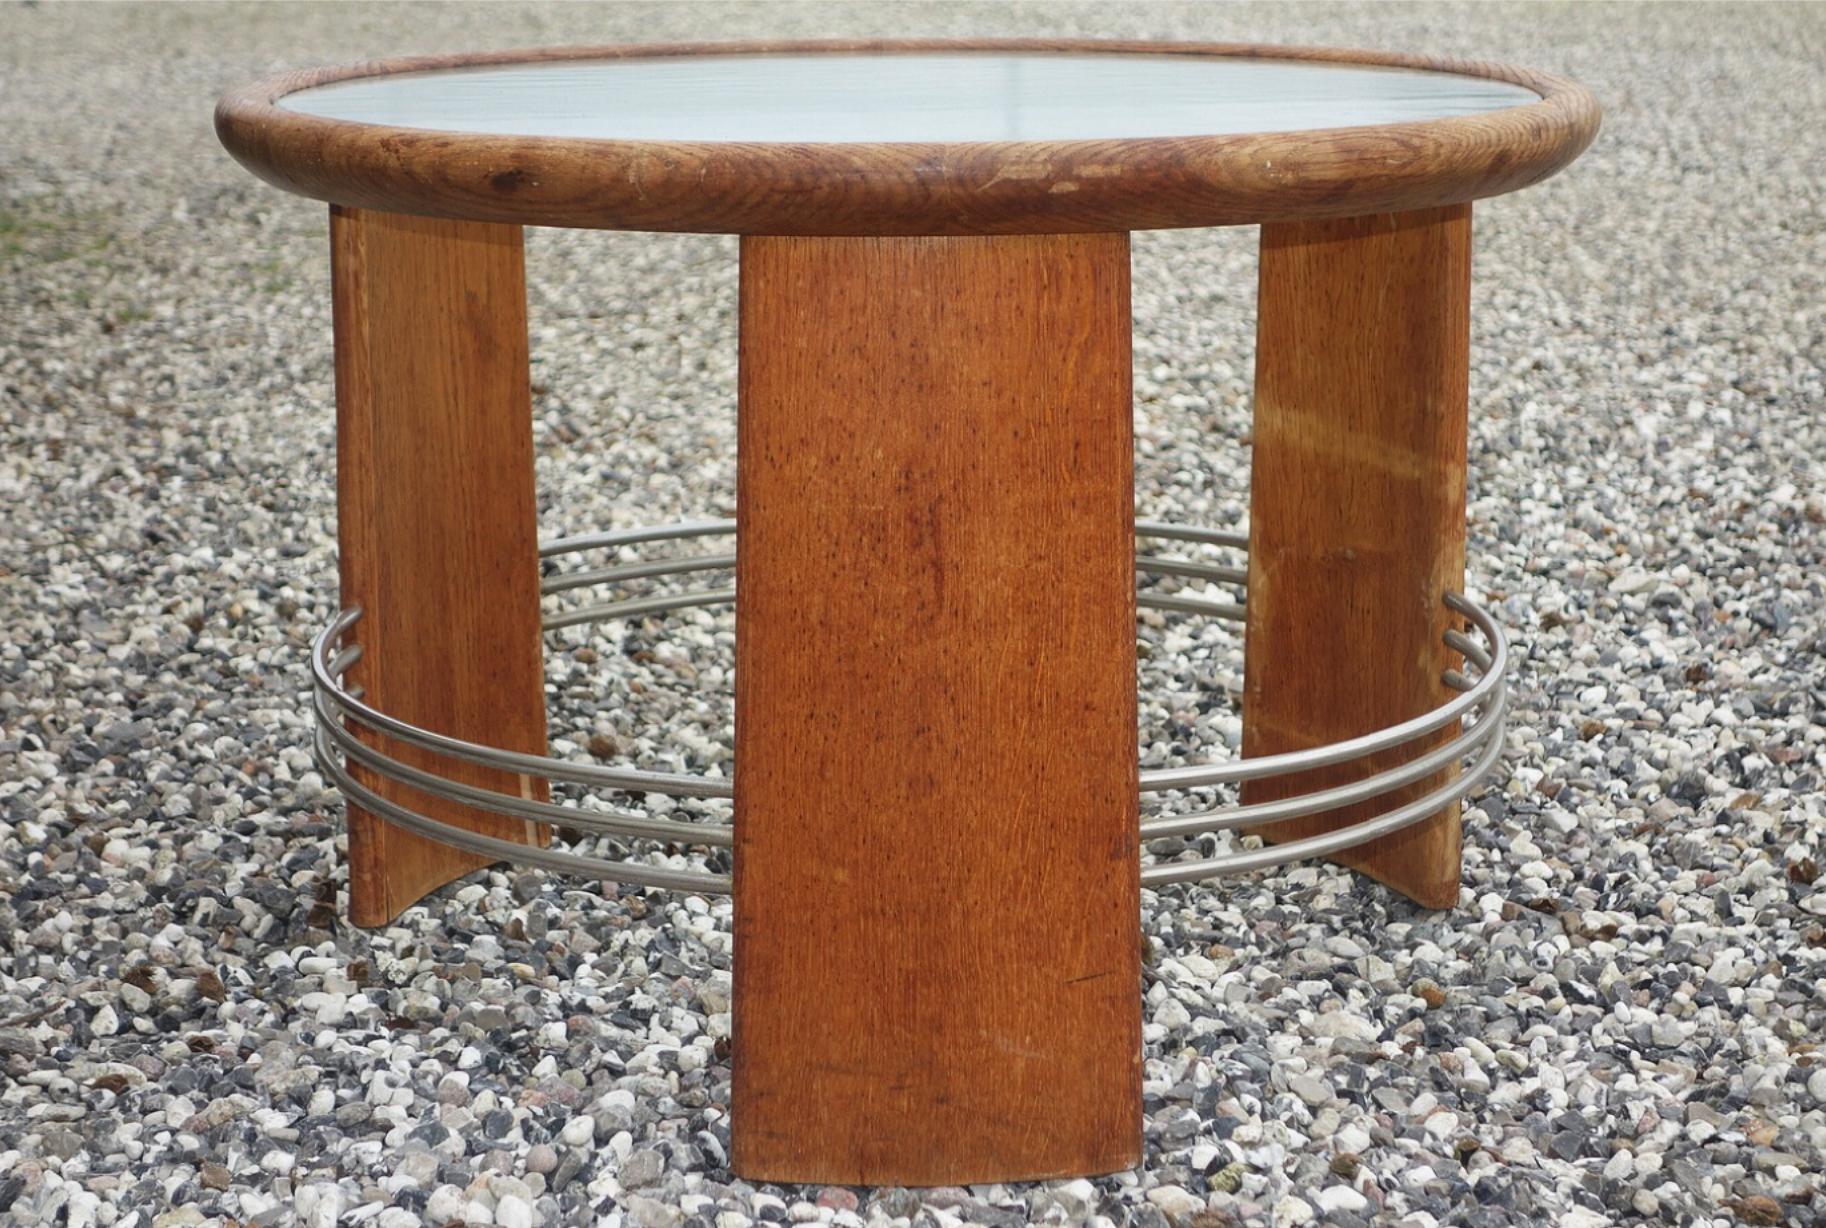 Circular Art Deco coffee table of oak with metal rails. Top of glass. Made 1930s-1940s. Measures: Height 50 cm., diameter 75 cm.
Wear of age and wear, including scratches, marks, damp marks, drying cracks and veneer damages on legs.
          